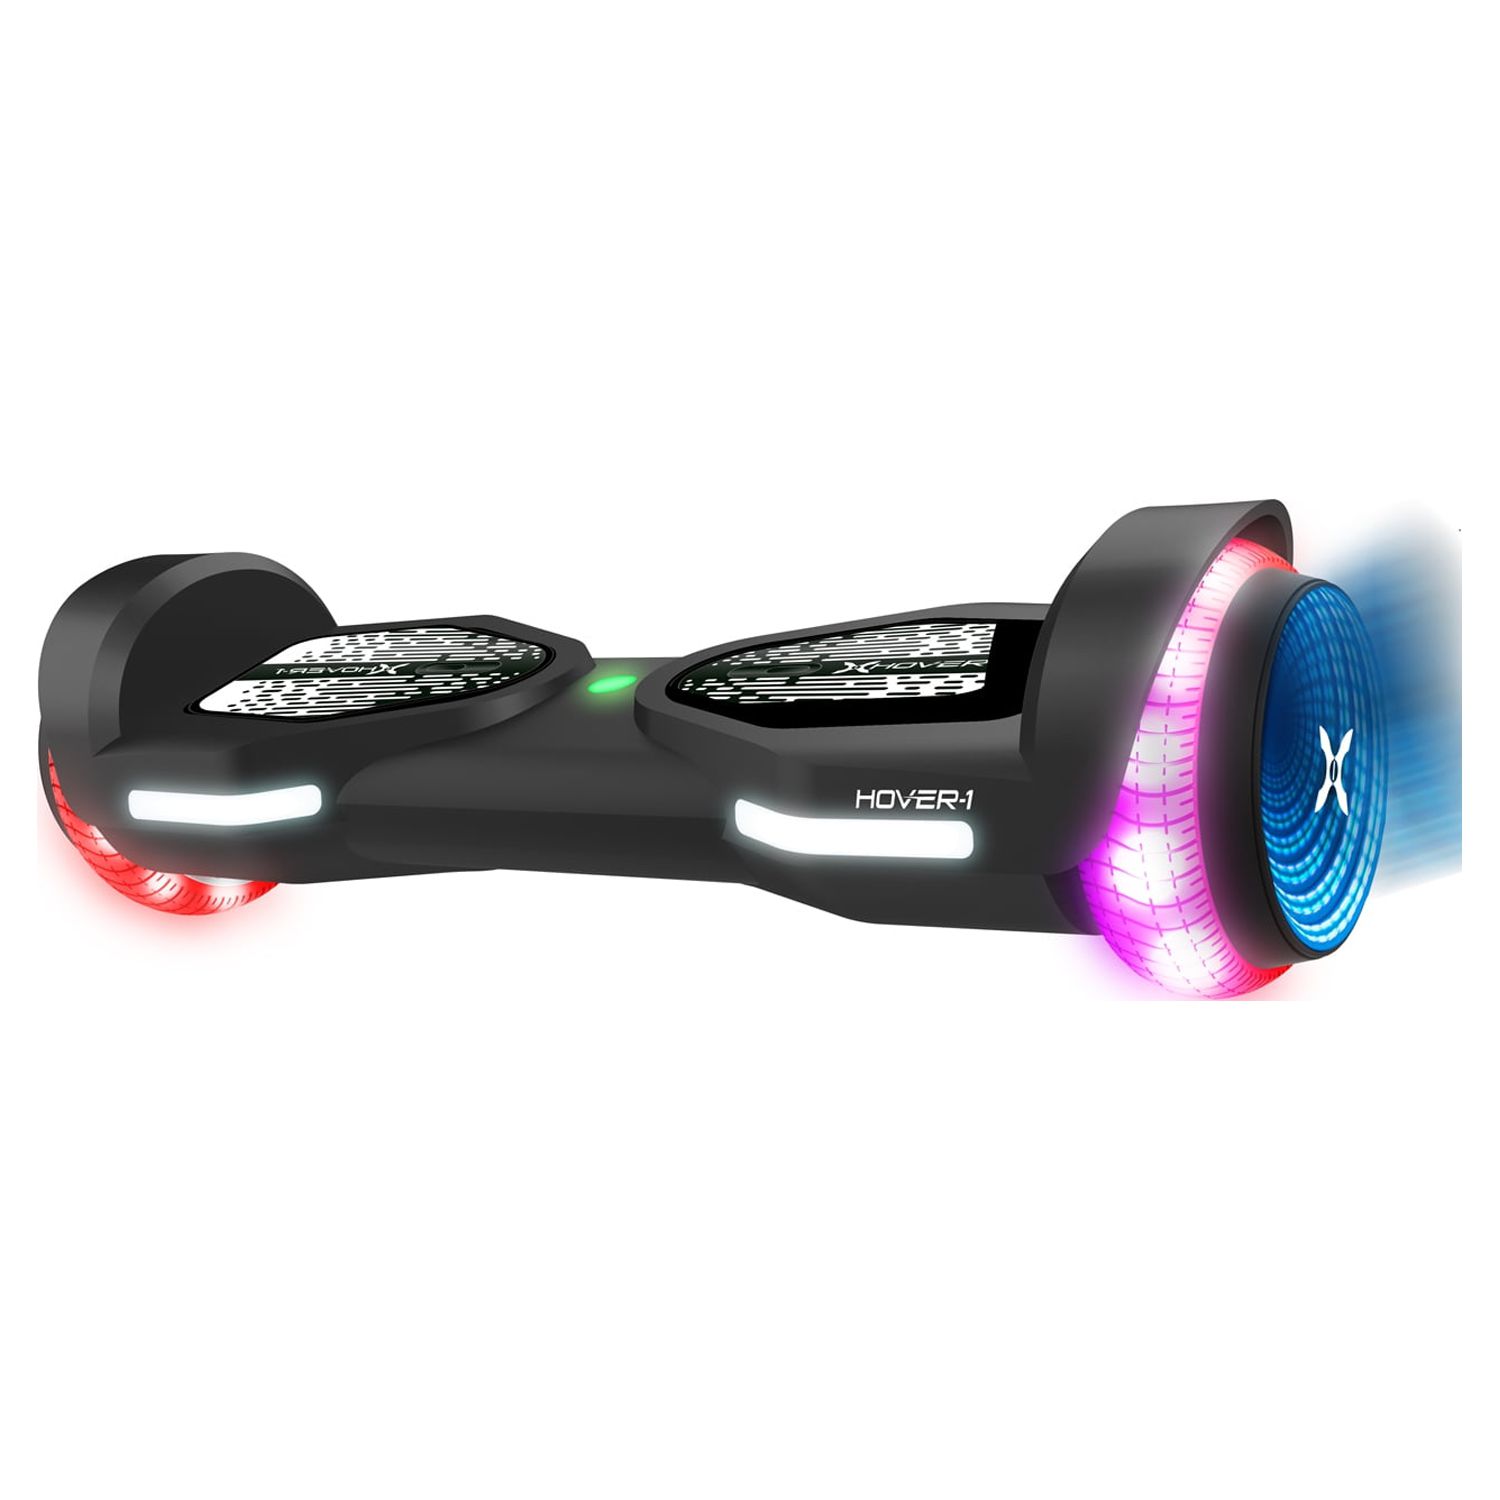 Hover-1 Allstar 2.0 Hoverboard for Teens, Black, Lightweight & Bluetooth, Max Speed 7 mph - image 1 of 6